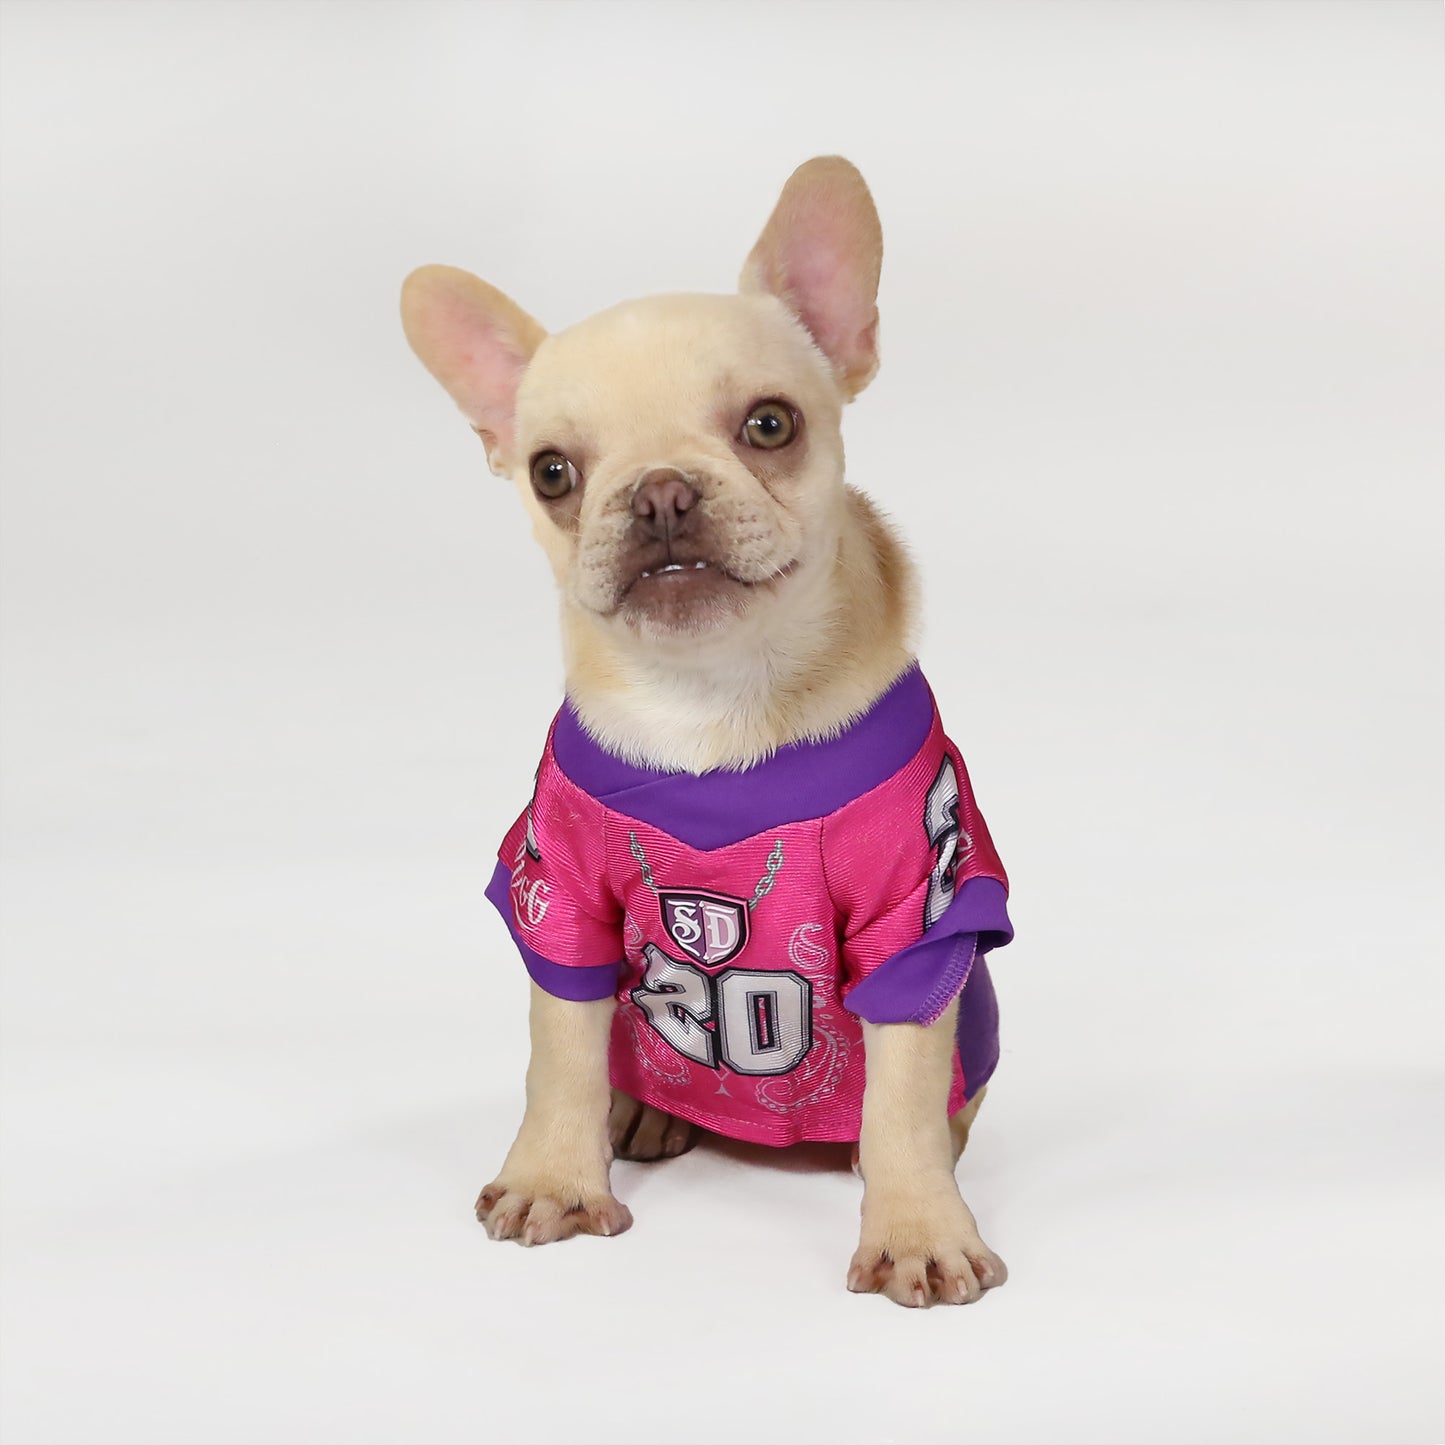 Fern the French Bulldog wearing the Boss Lady Deluxe Pet Jersey in size Extra Small.